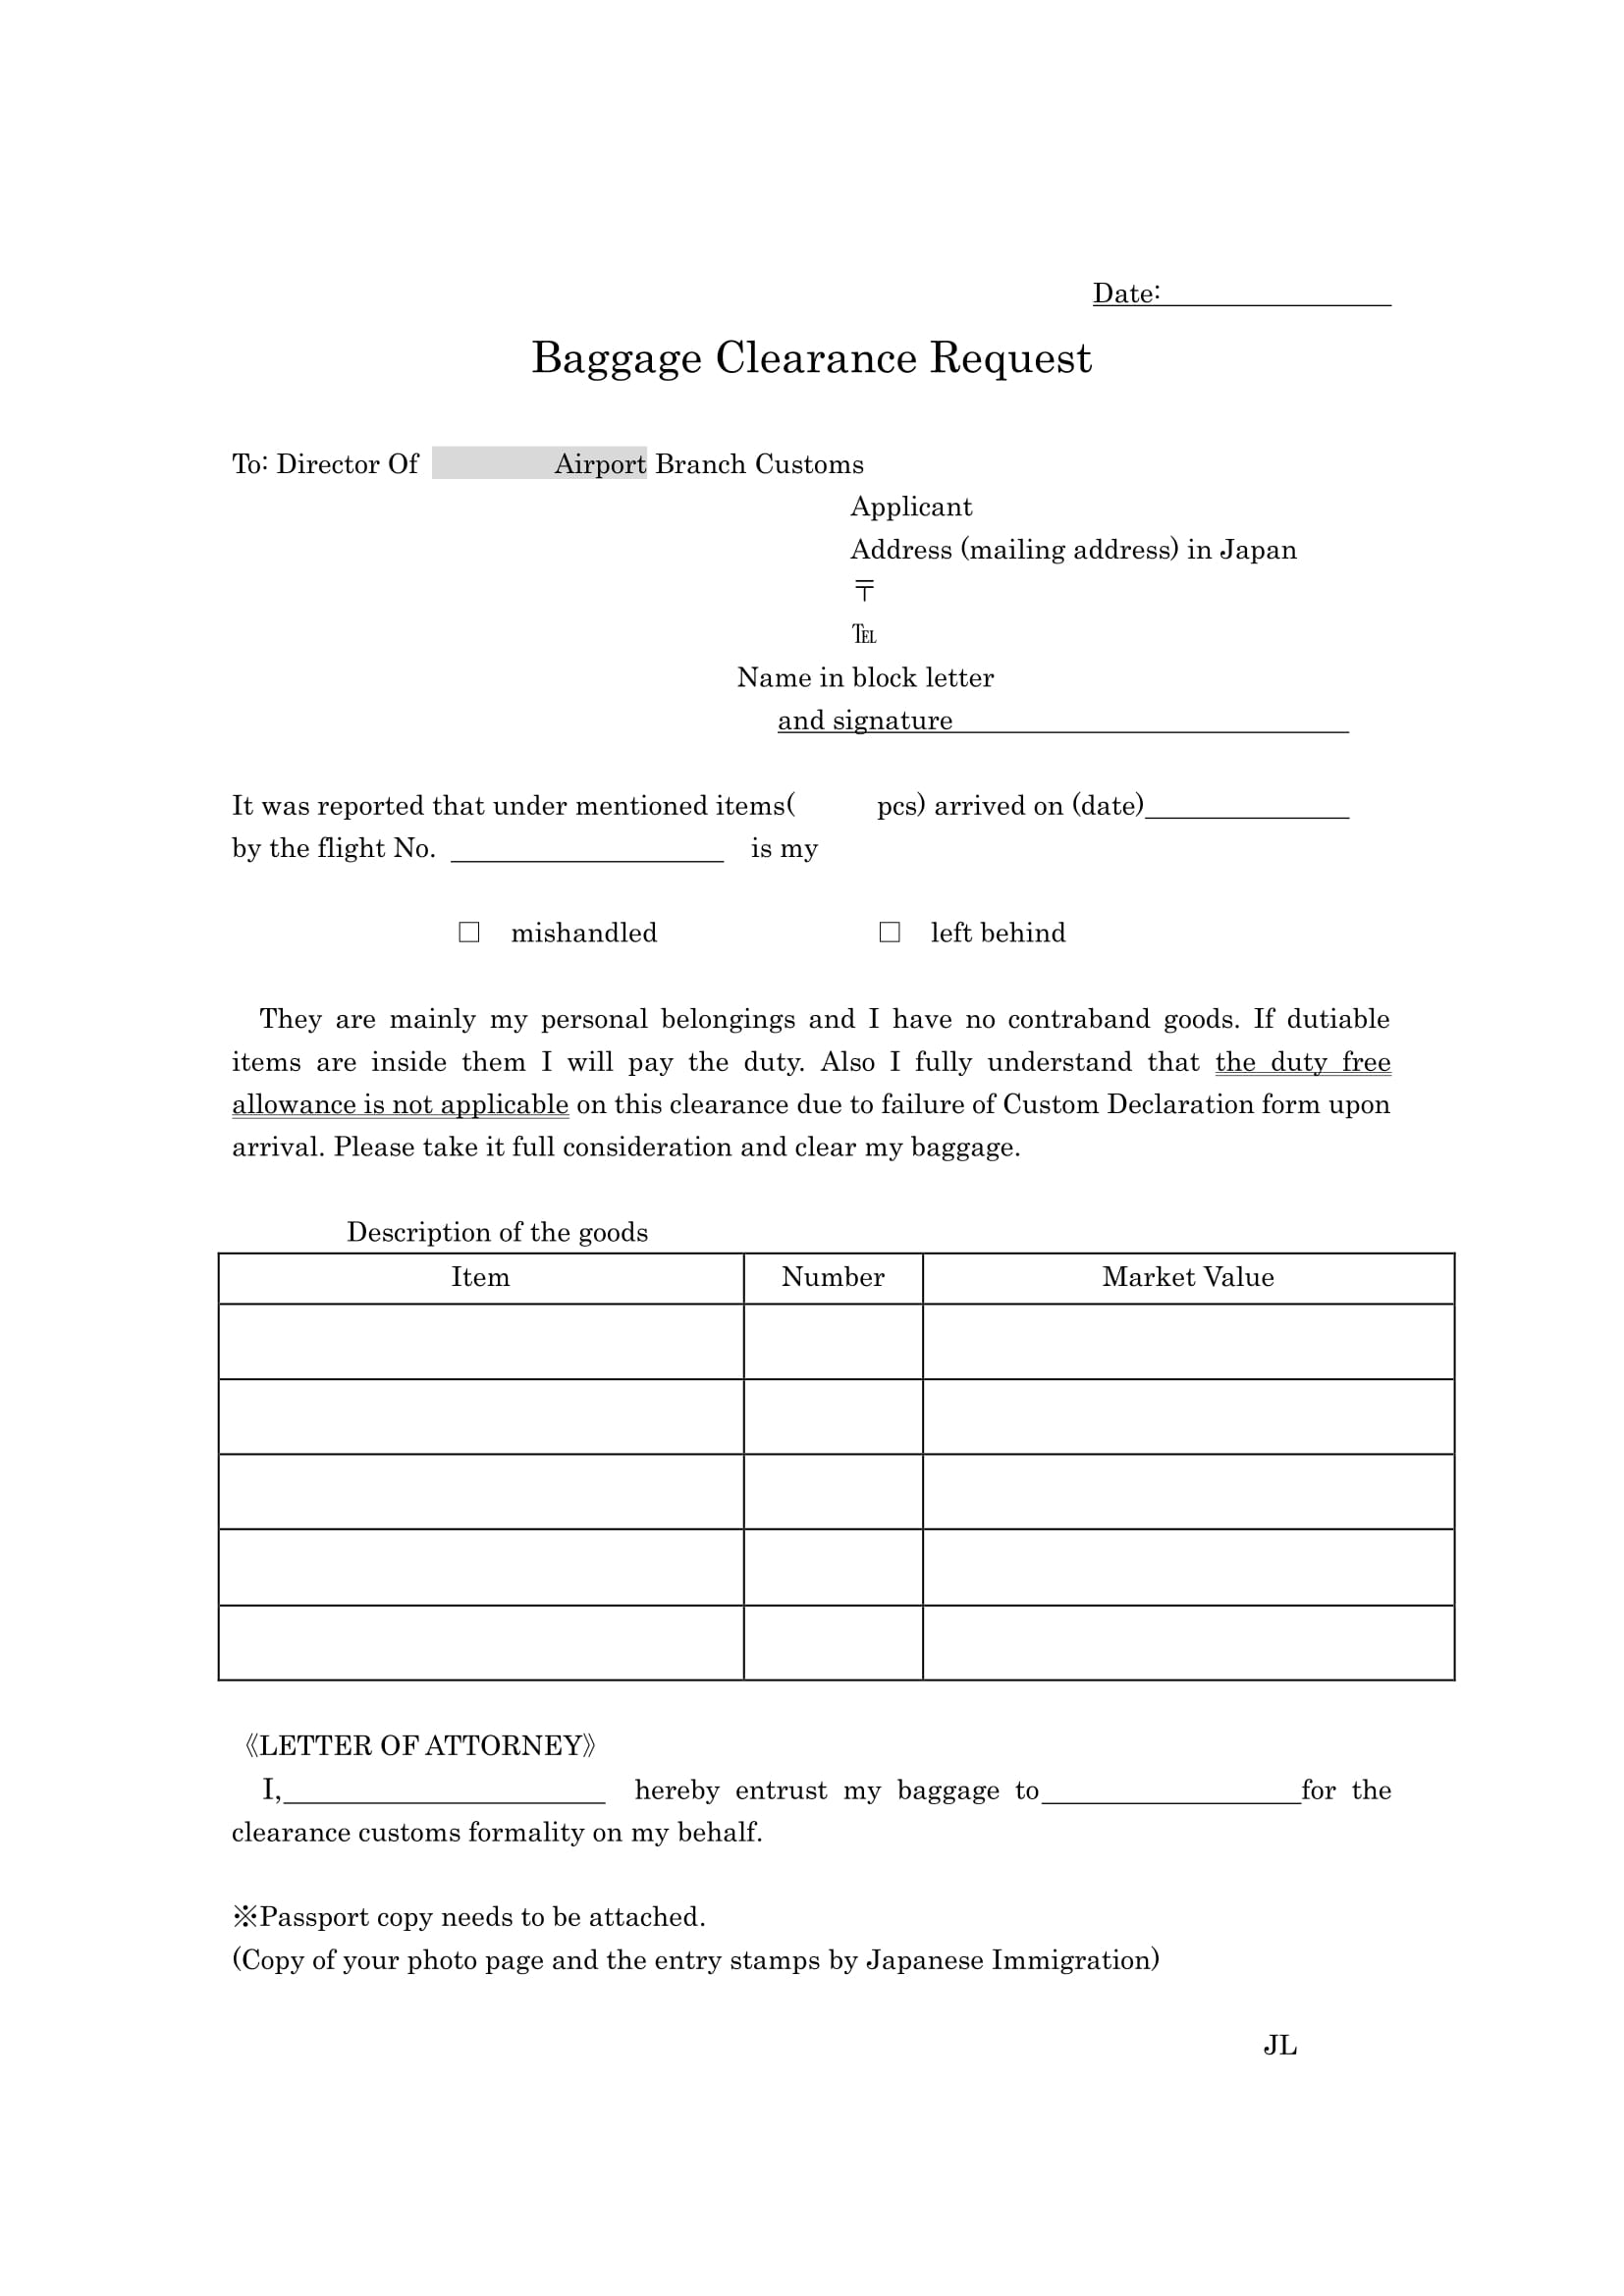 baggage clearance request form 1